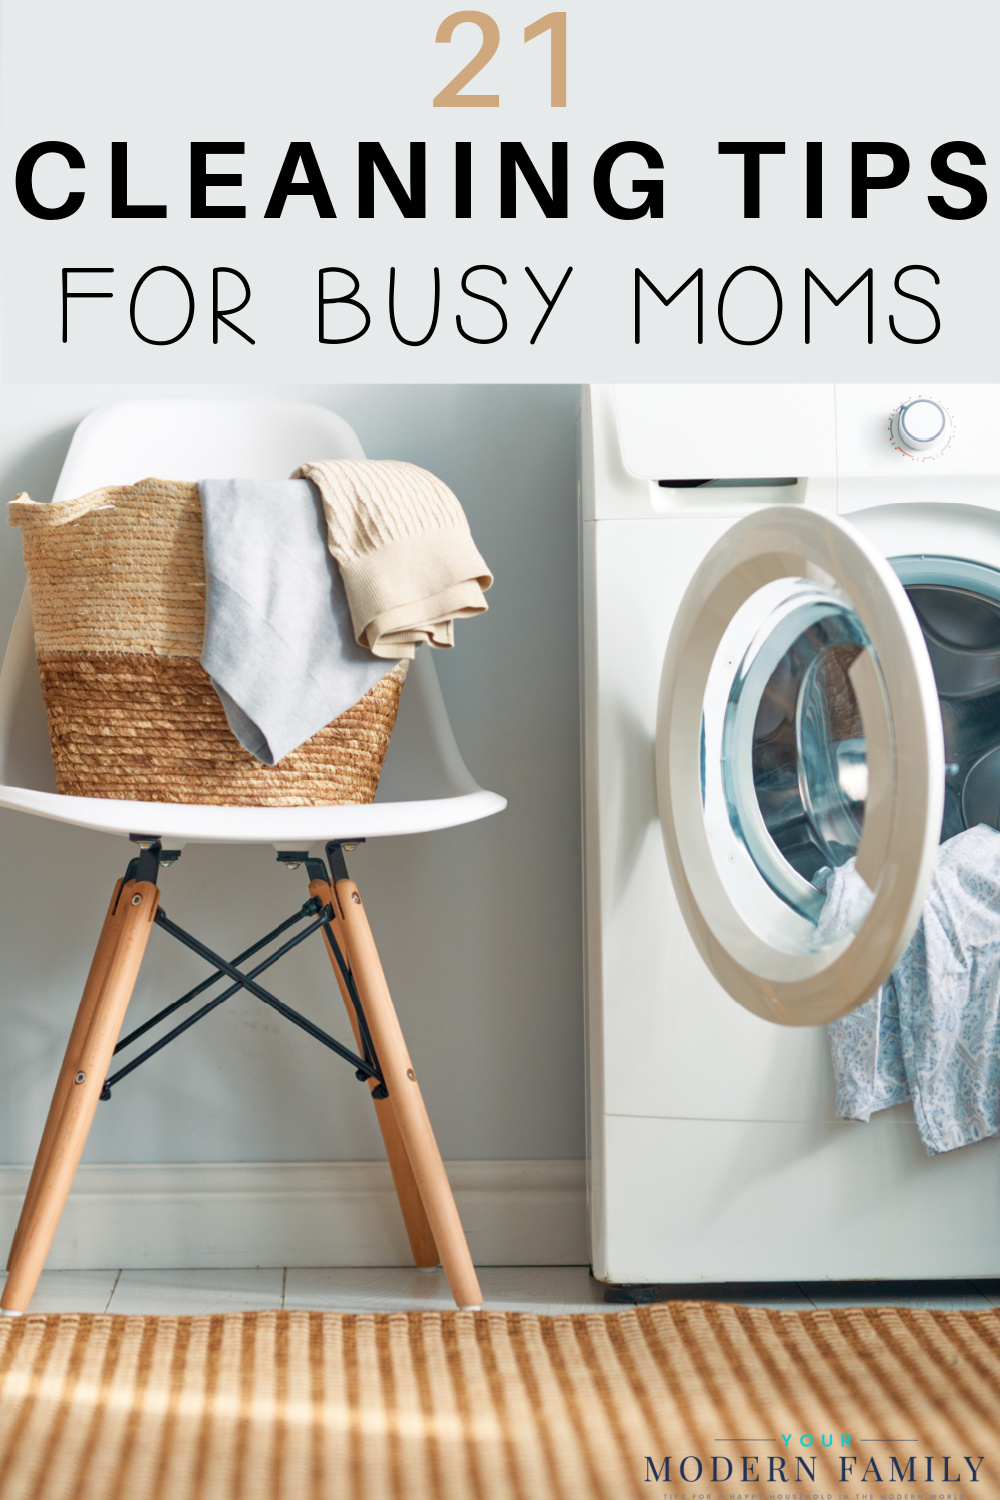 CLEANING TIPS FOR BUSY MOMS